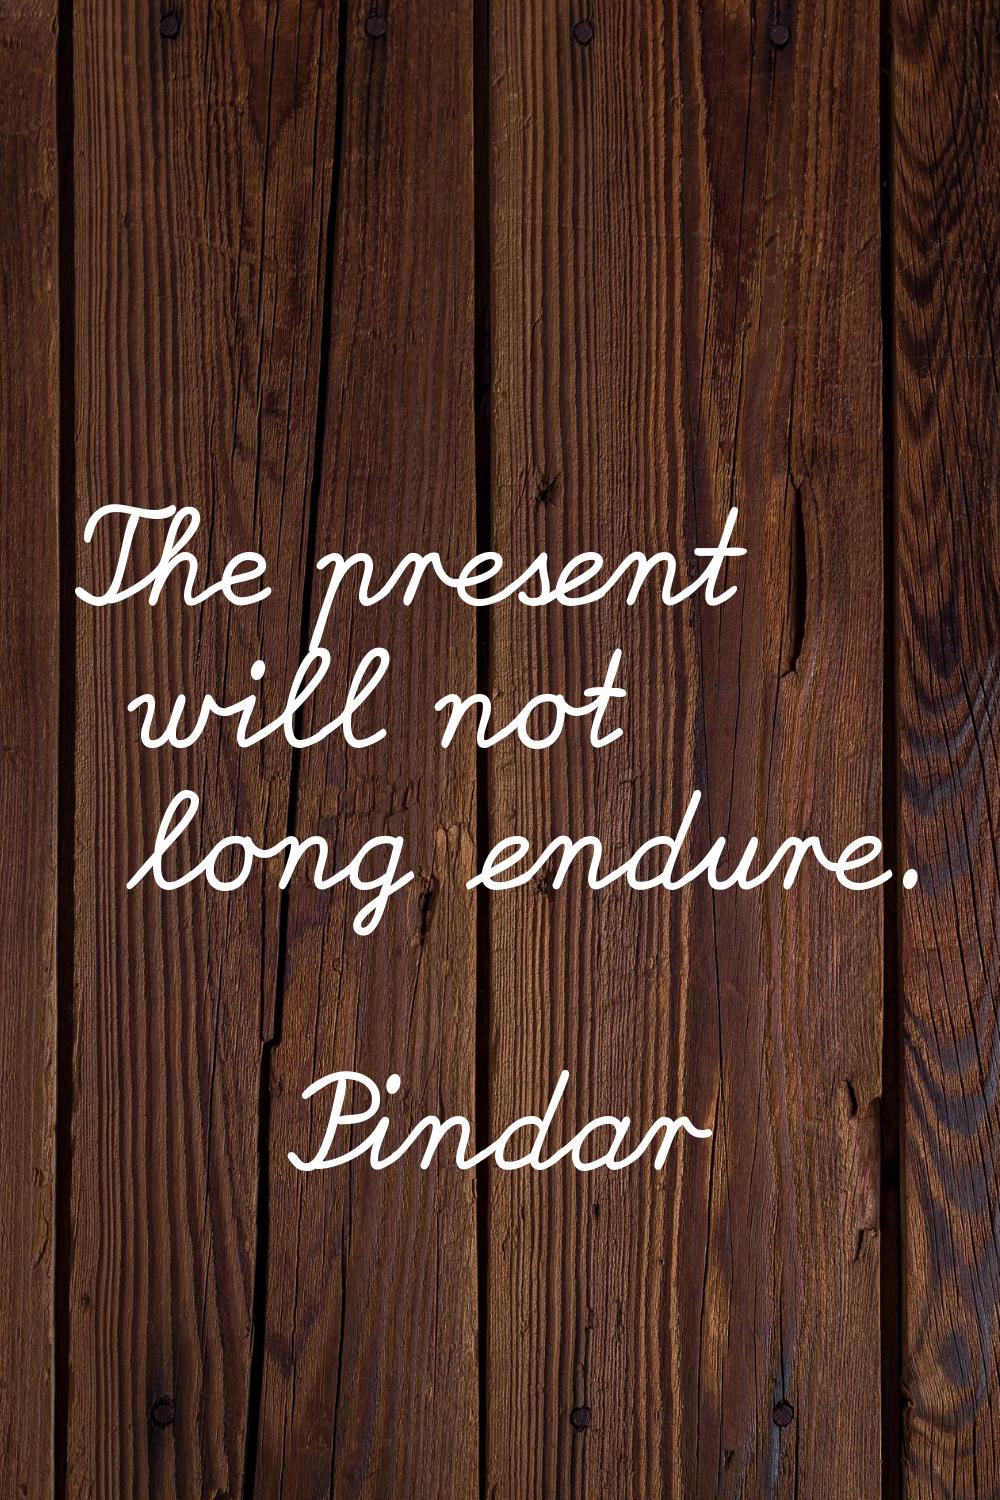 The present will not long endure.